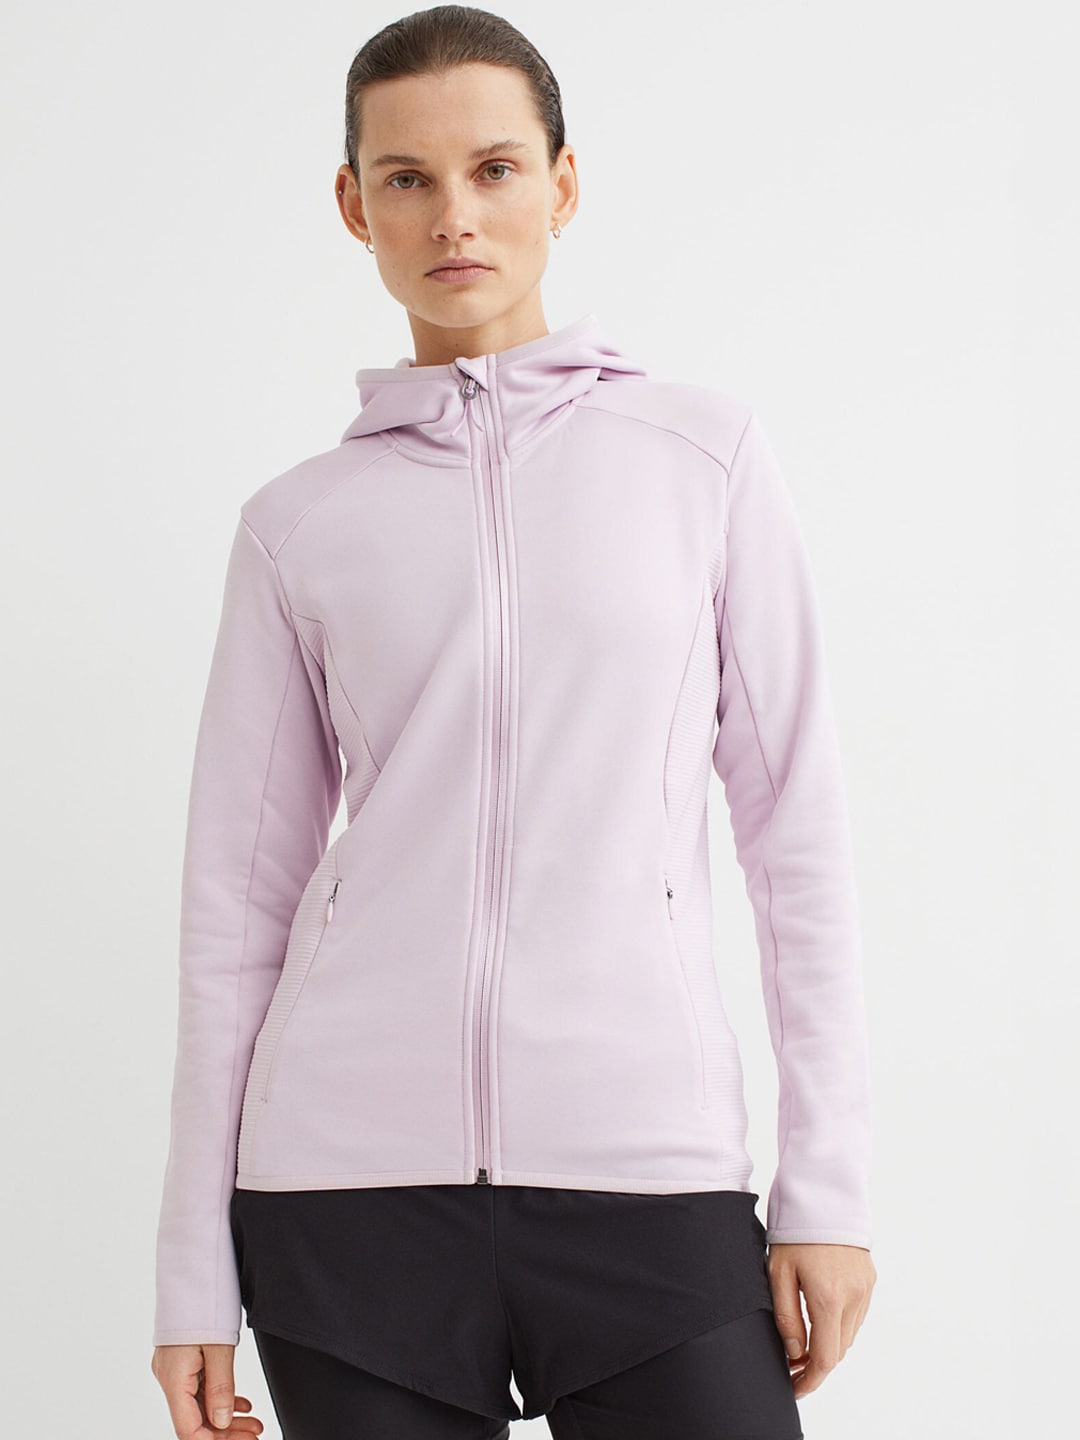 H&M Women Lavender Solid Hooded Outdoor Jacket Price in India